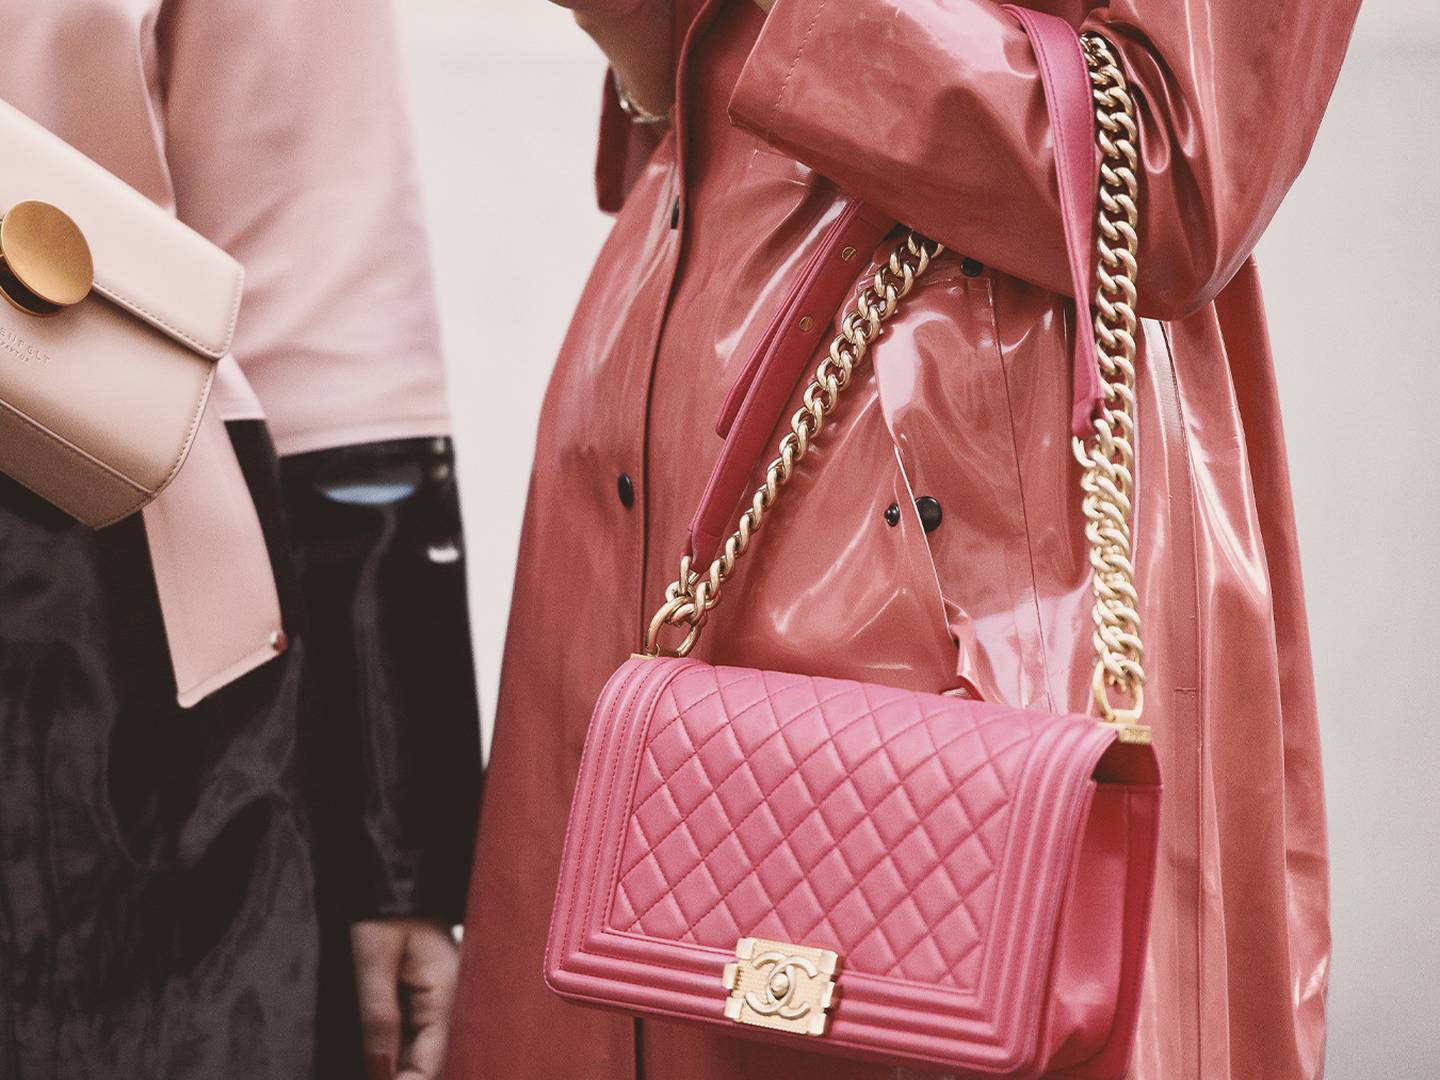 chanel purse official website